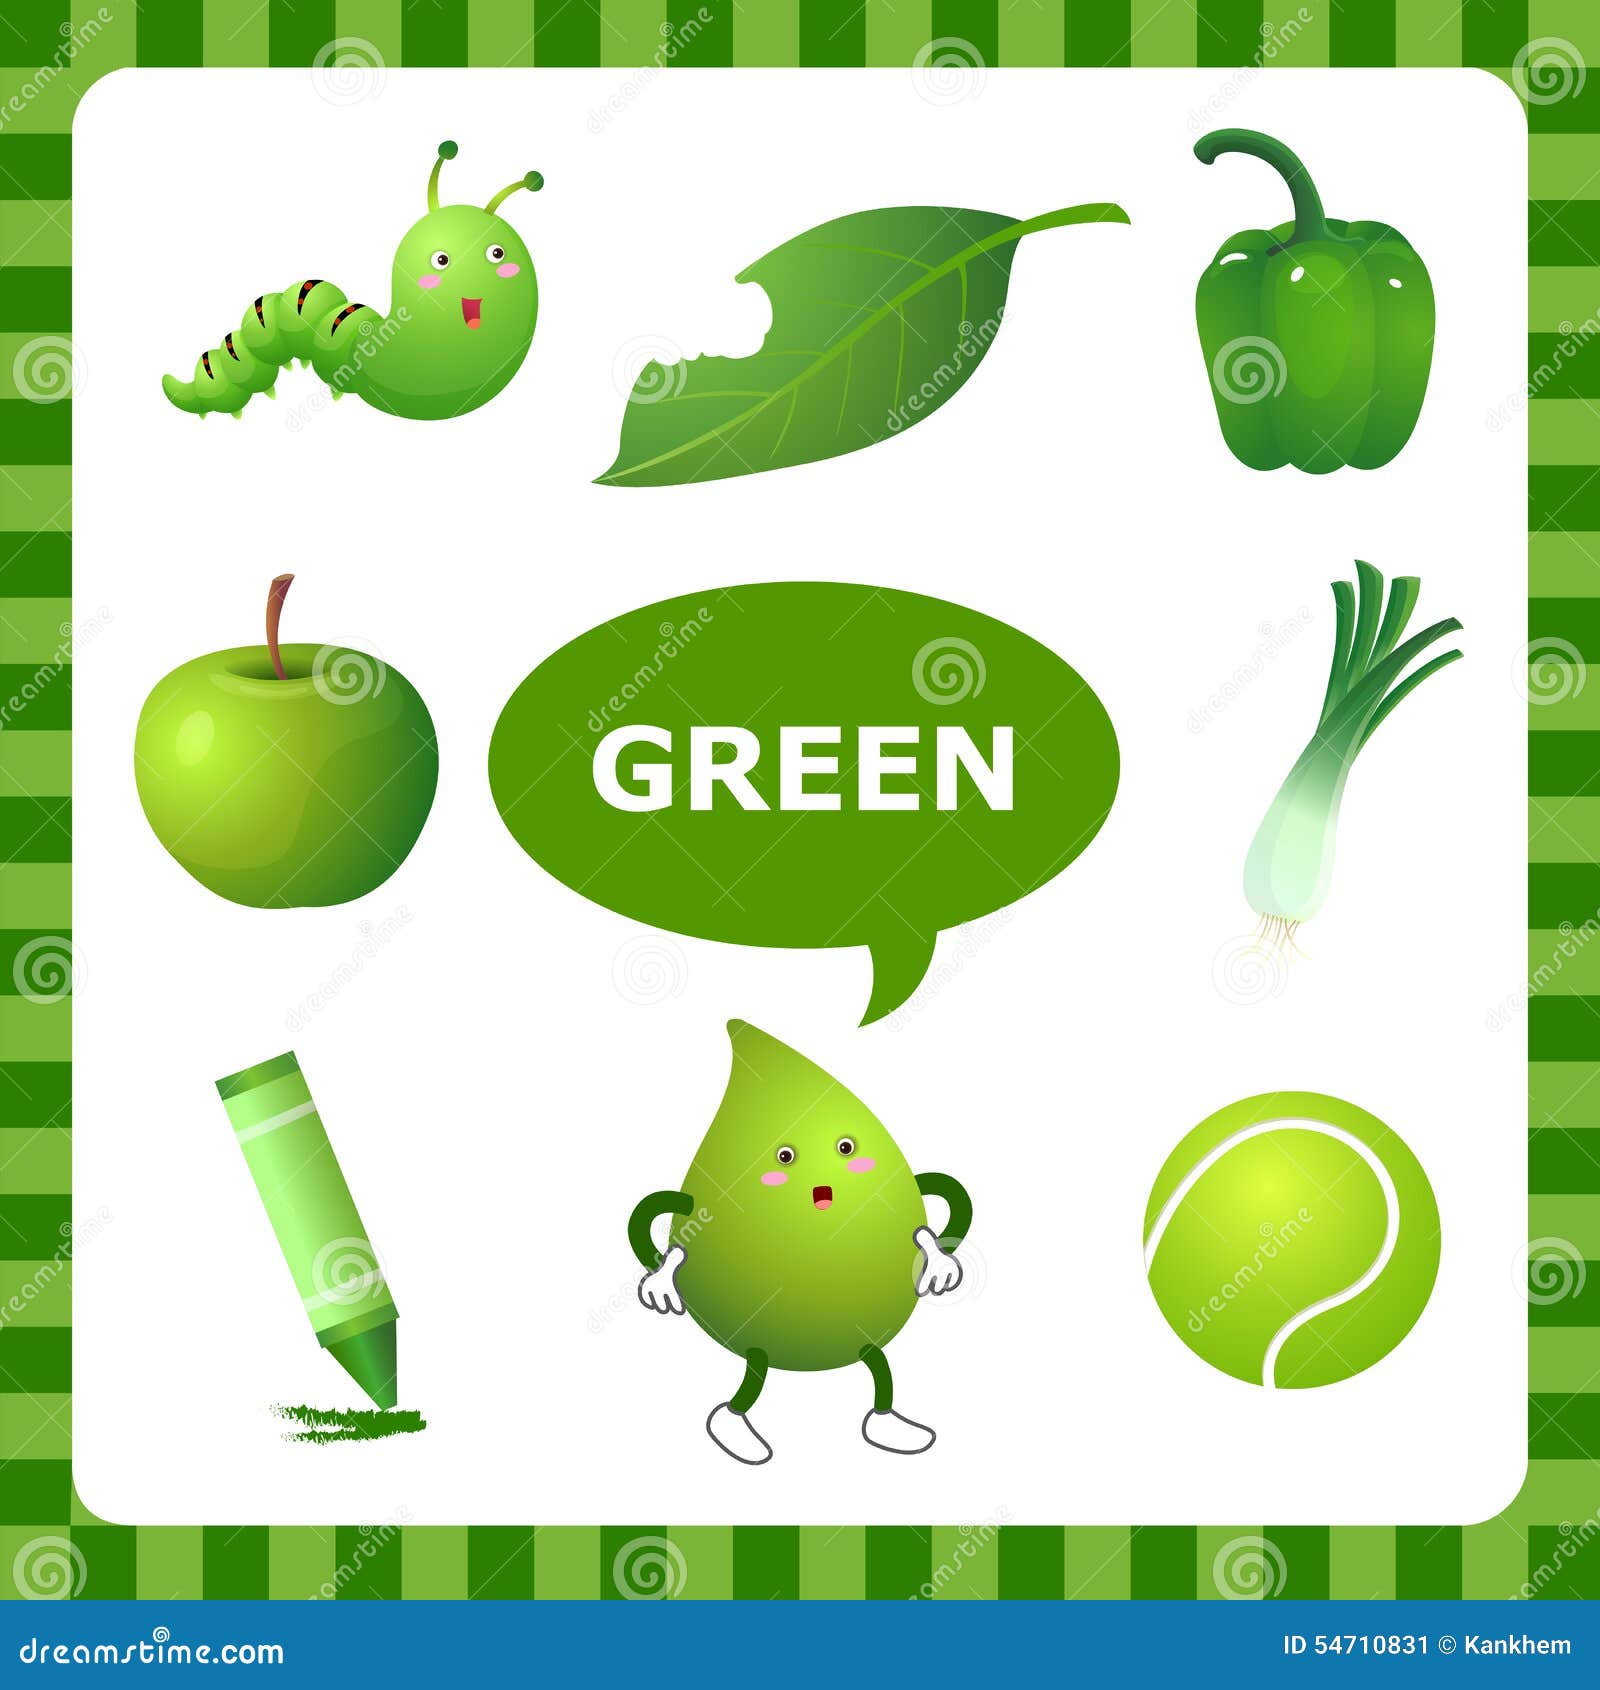 green things clipart - photo #37